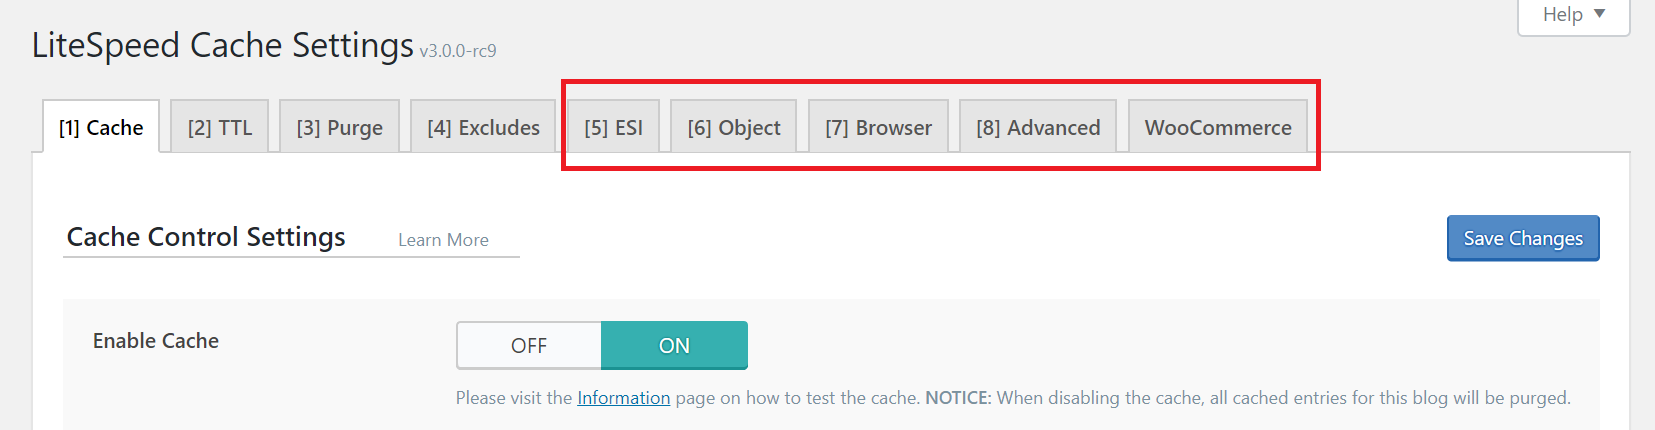 LiteSpeed Cache for WordPress Other Cache Tabs